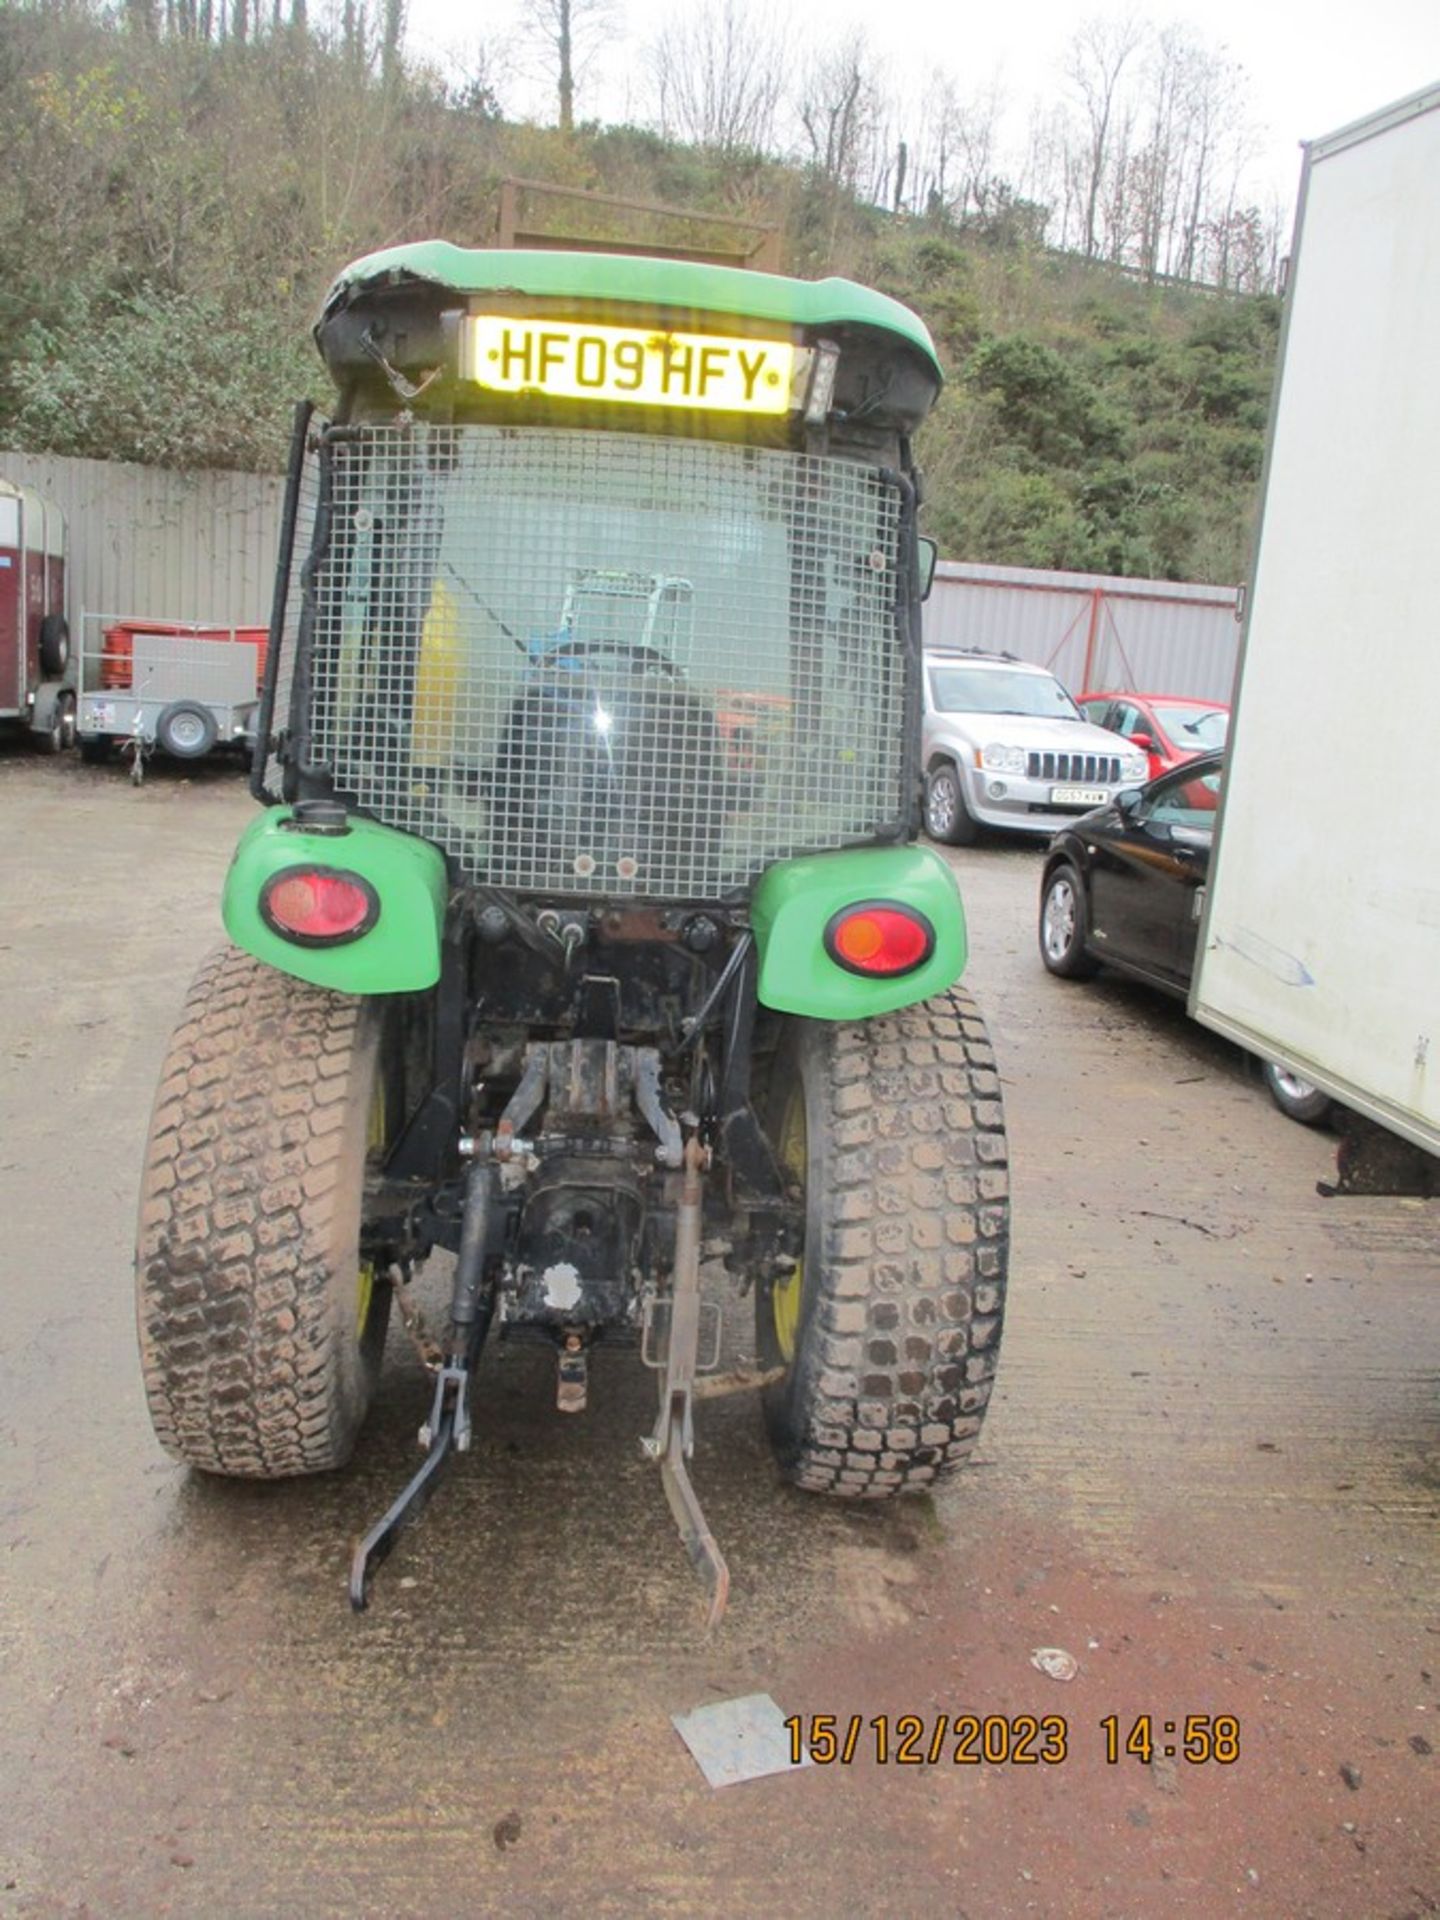 JOHN DEERE 3520 TRACTOR 2009 SHOWS 2250HRS C.W V5 SHOWING 1 COUNCIL OWNER FROM NEW NON RUNNER - Image 5 of 6